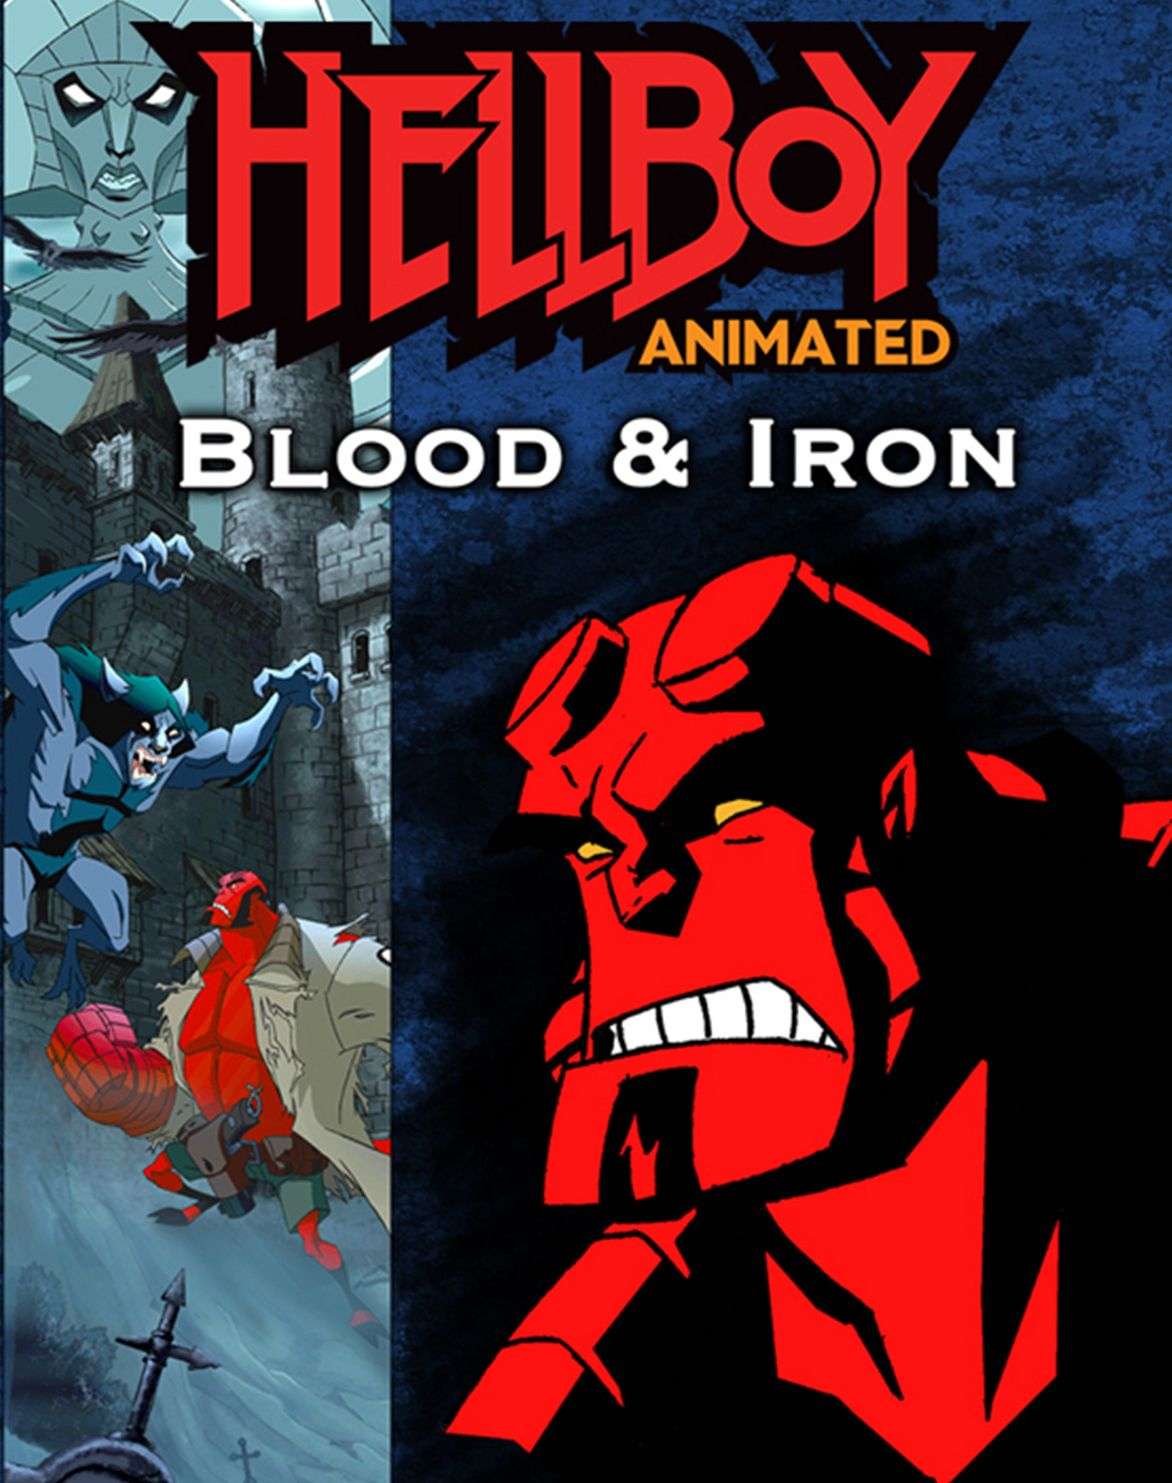 Hellboy Blood and Iron-Based On Hellboy Movies